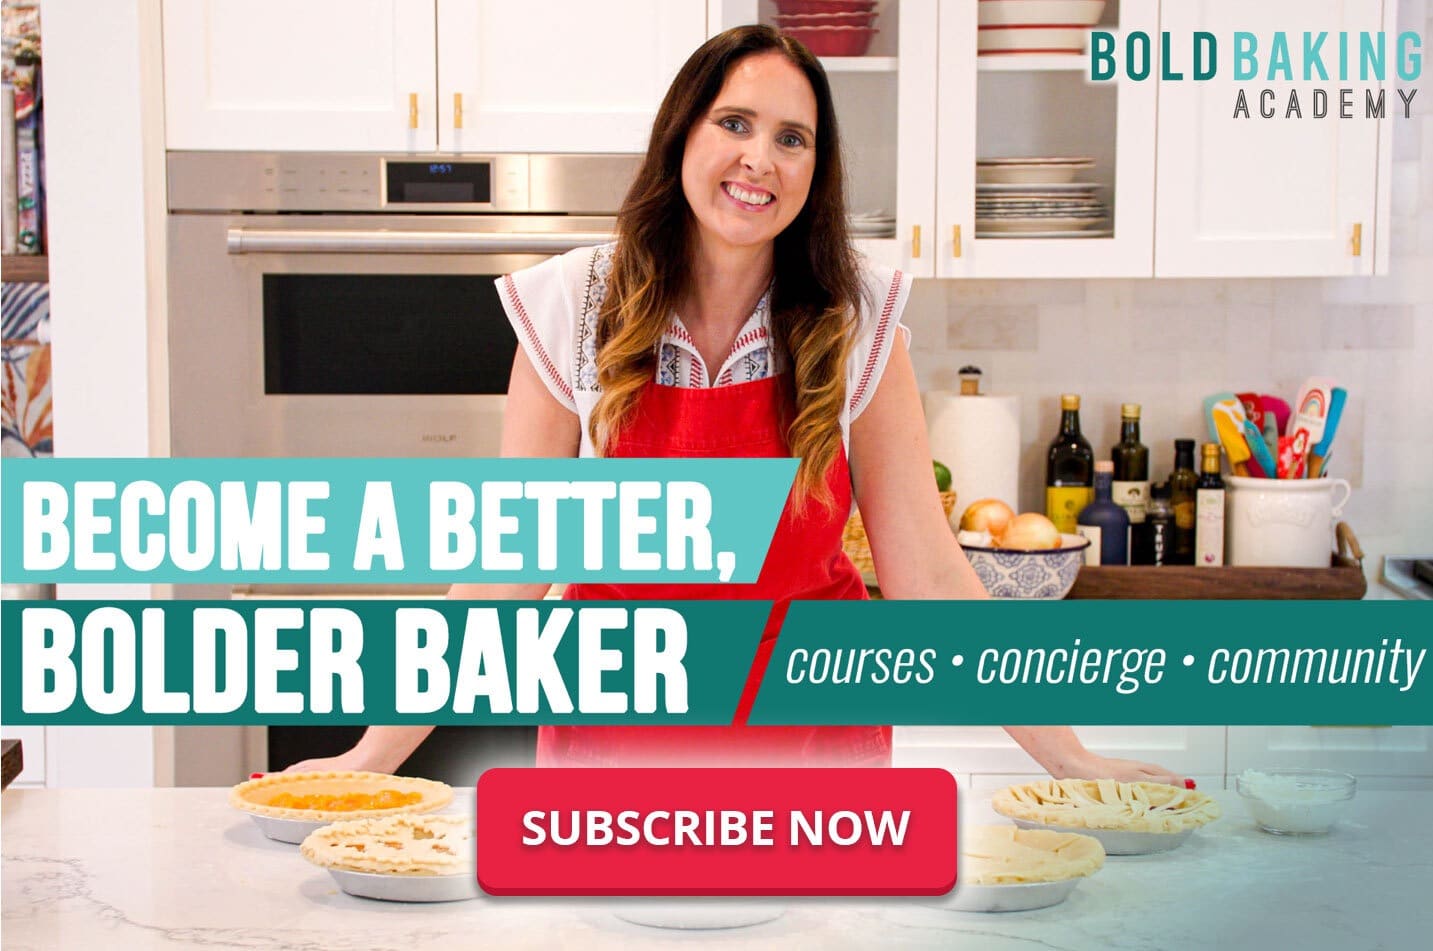 Banner to subscribe now to the Bold Baking Academy